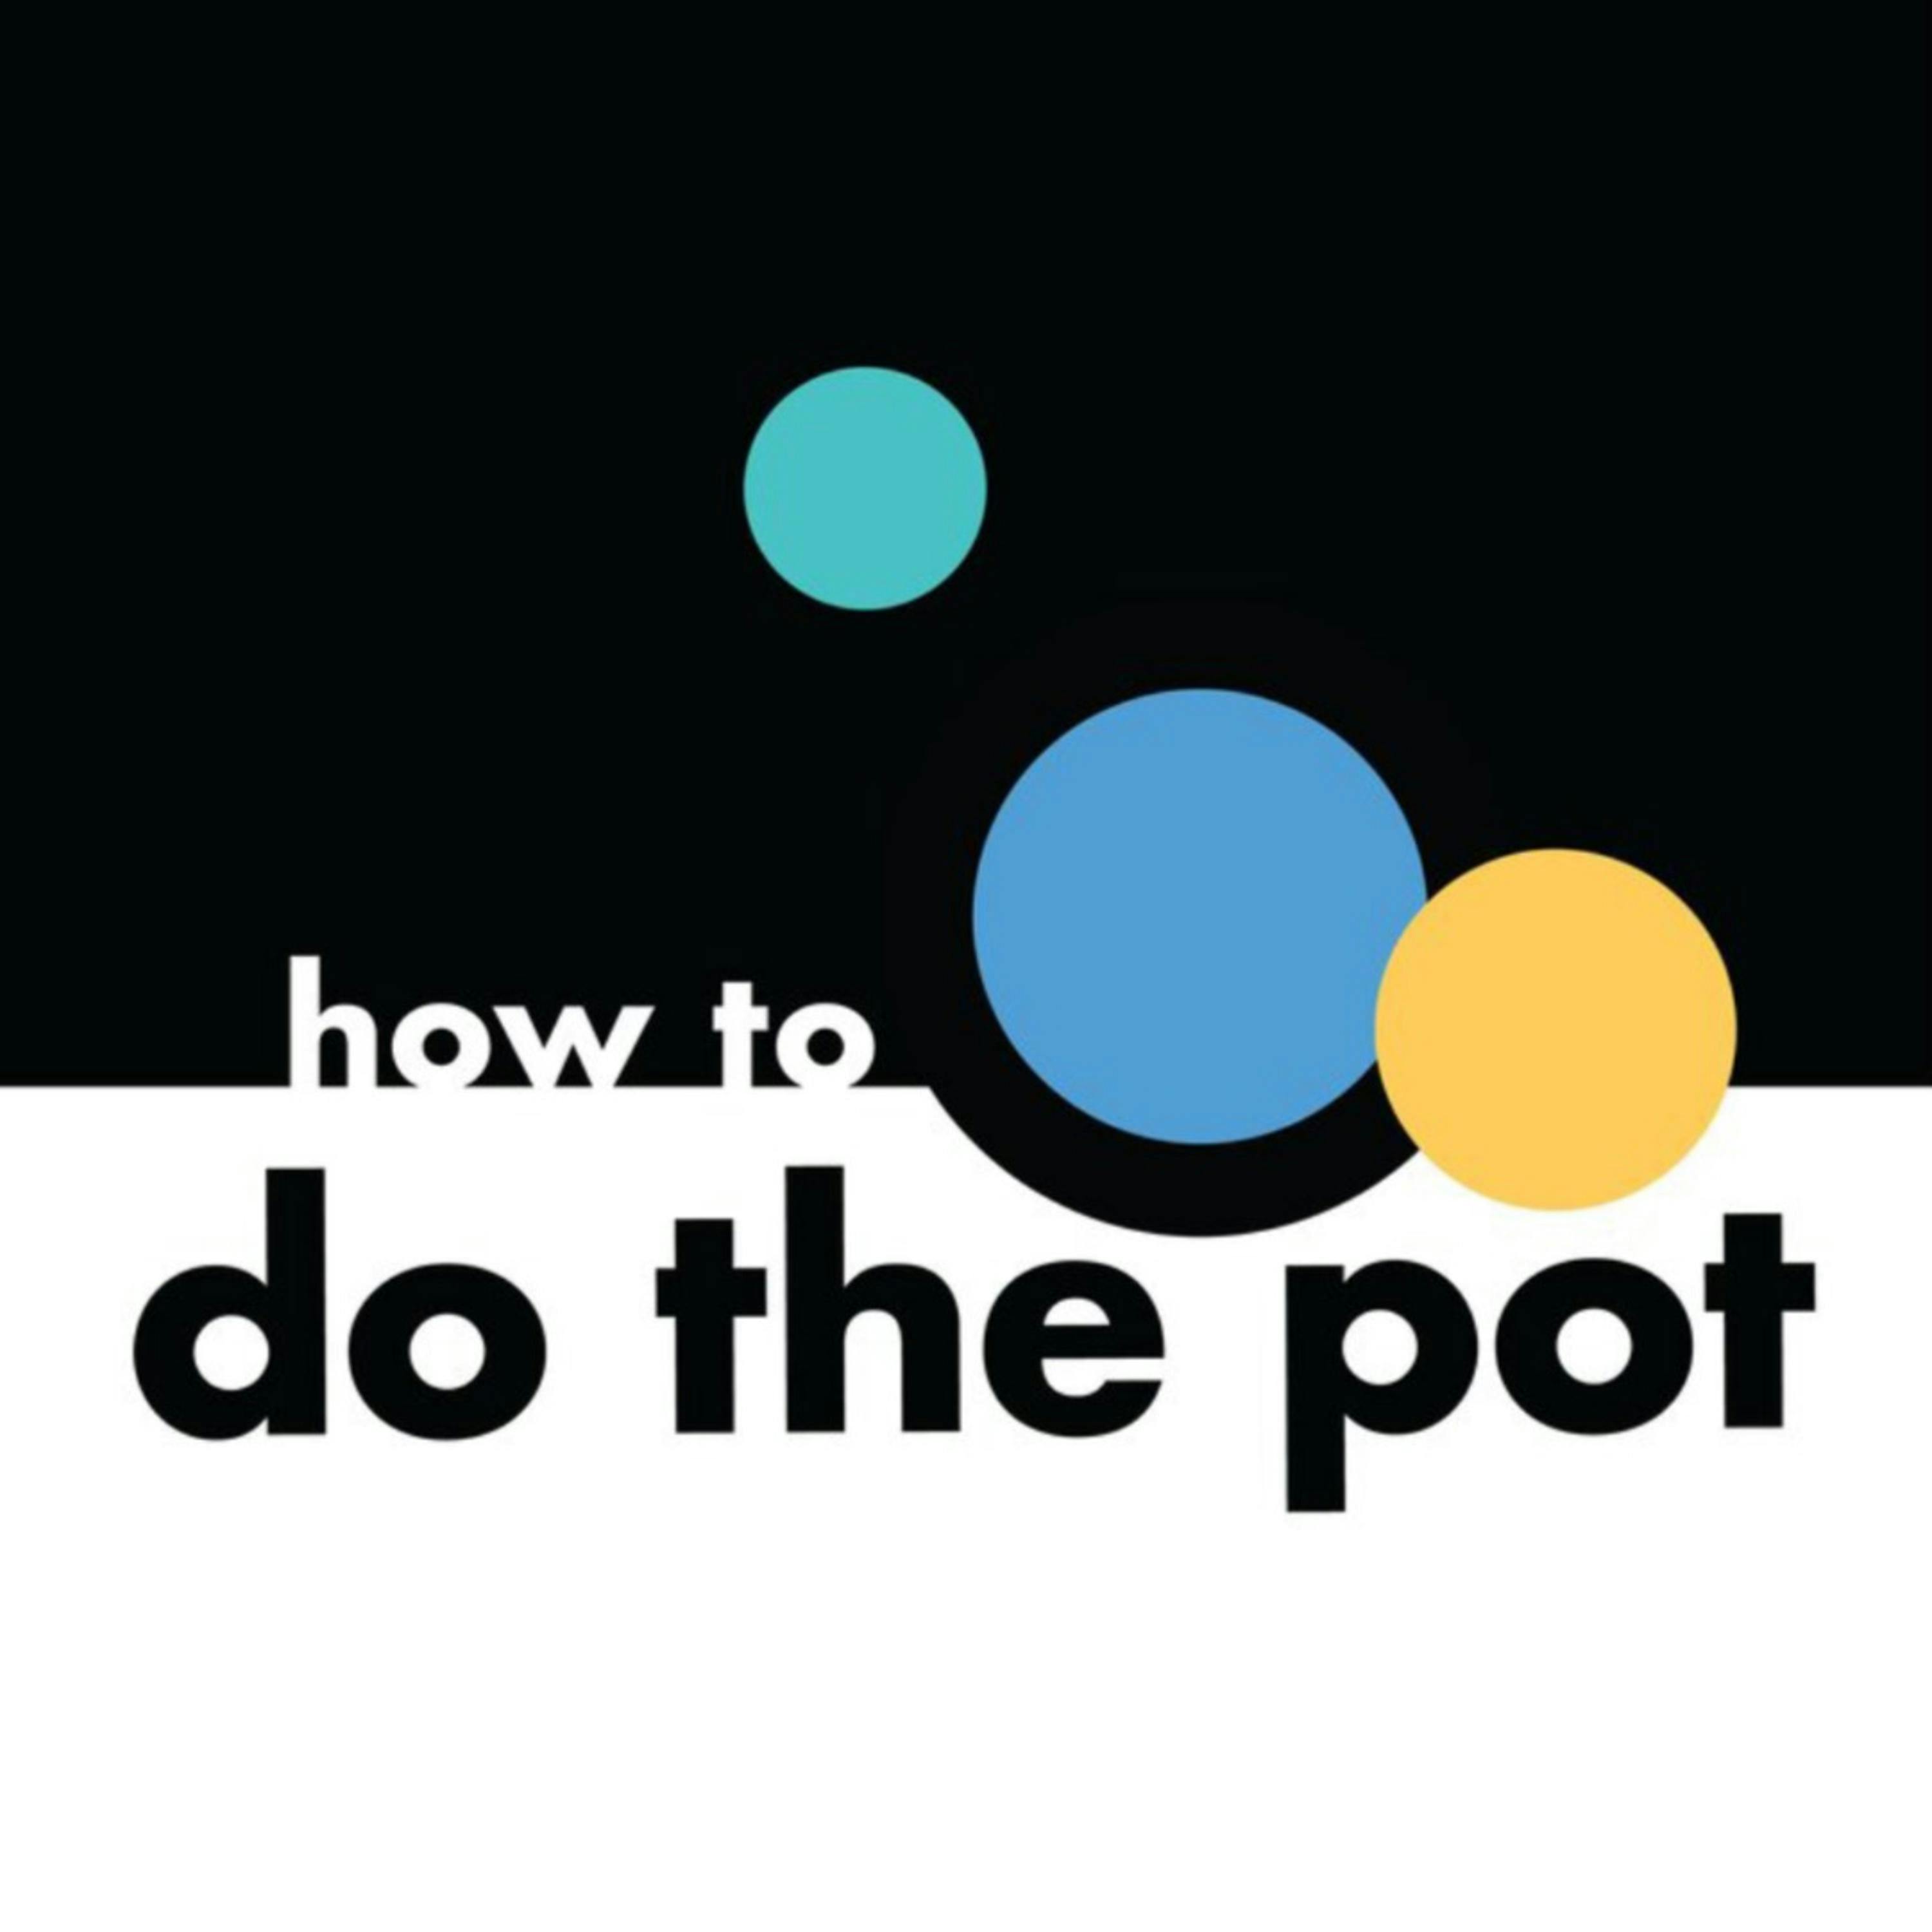 81. How to Grow Weed at Home: Cultivating the Right Mindset